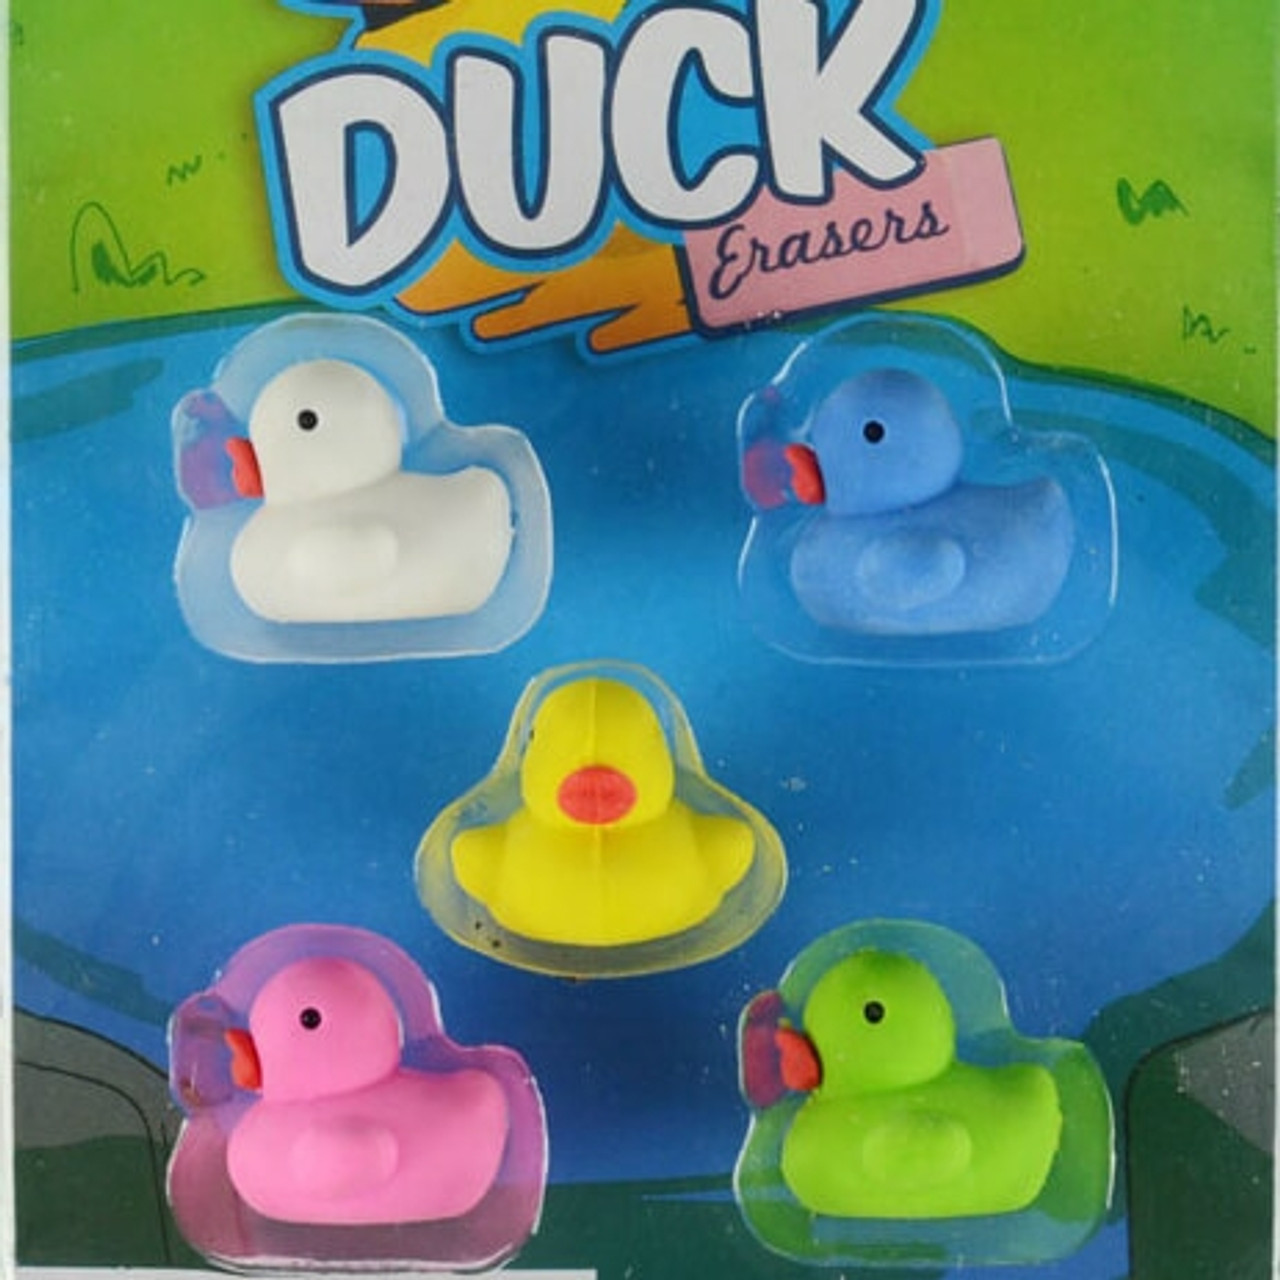 Mini Rubber Ducks in 2 Capsules - Capsule Toys - from SmileMakers